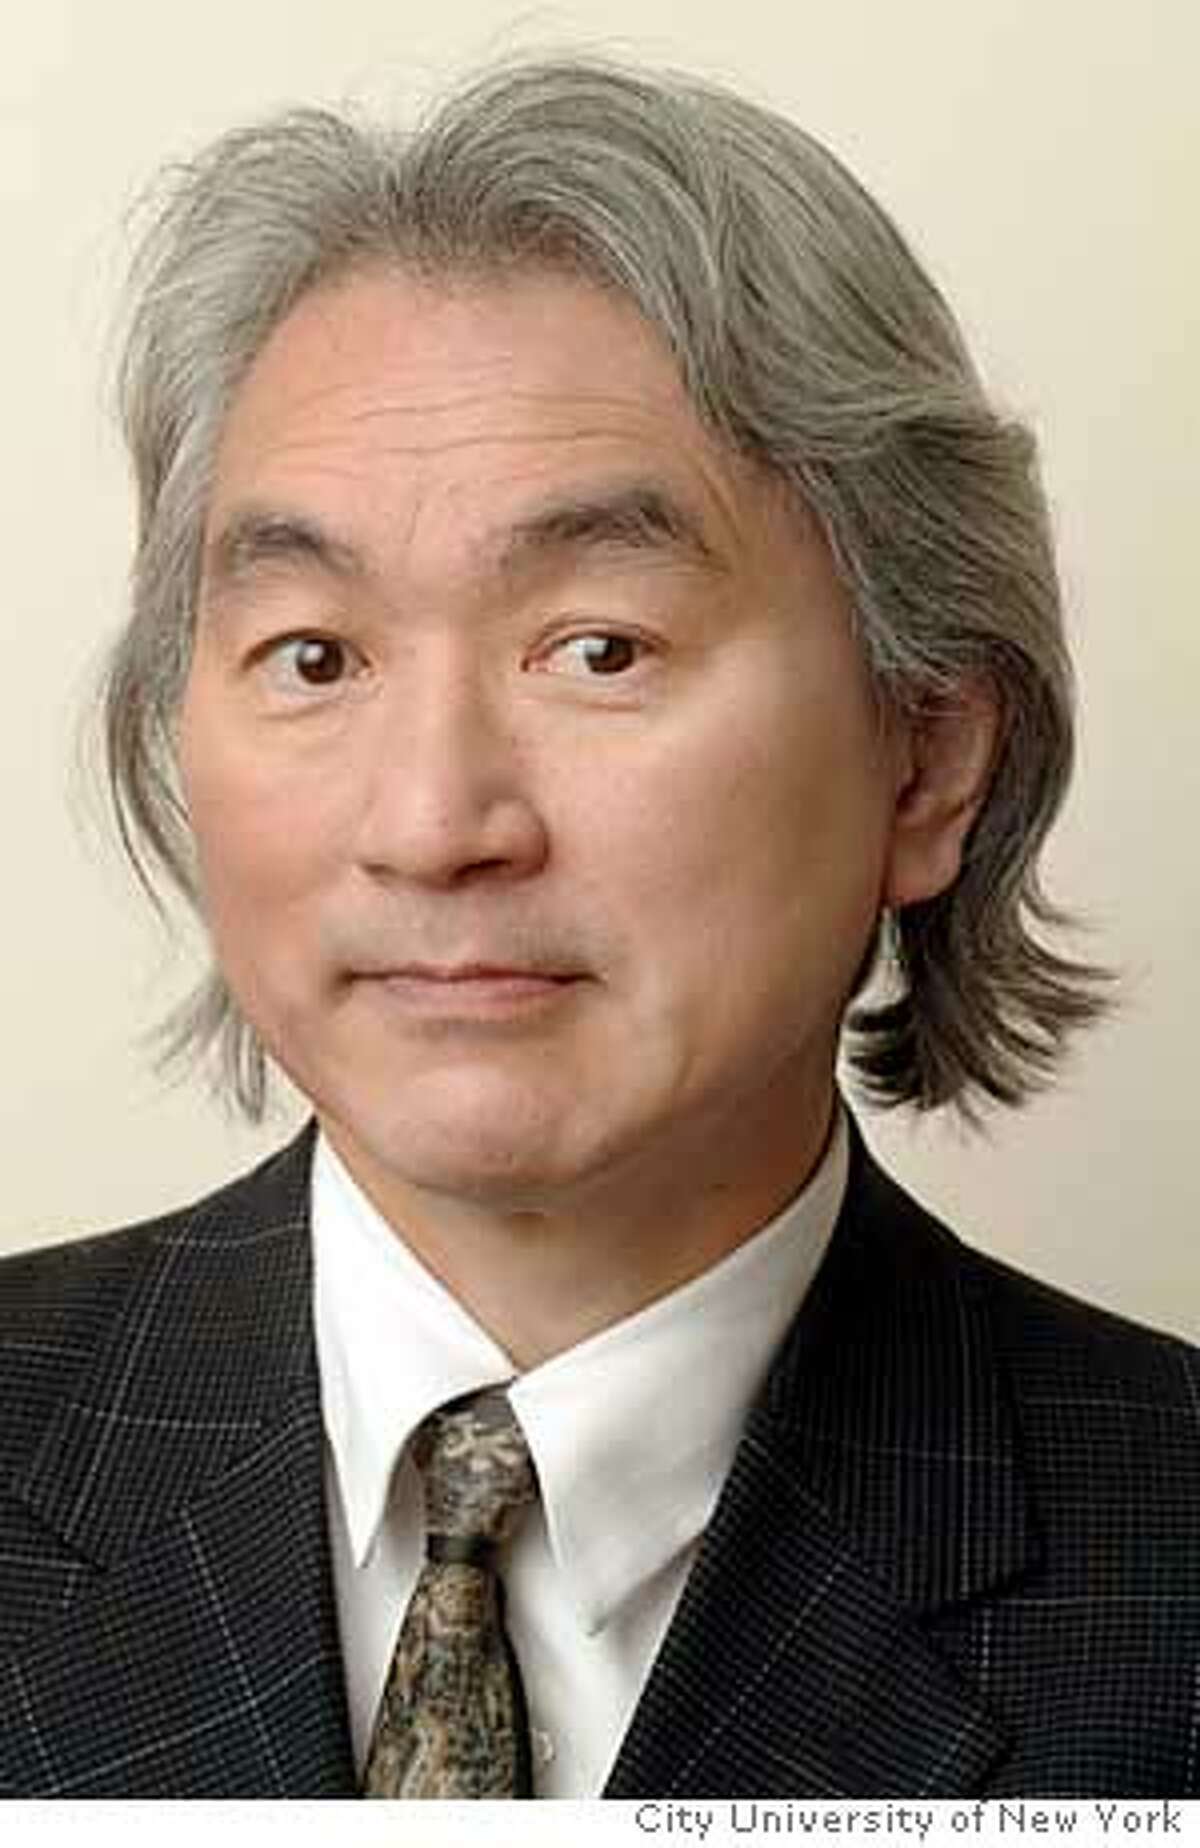 Photo of physicist Michio Kaku of City University of New York. (For story about his disagreement with Lawrence Krauss). Photo: Courtesy of City University of New York